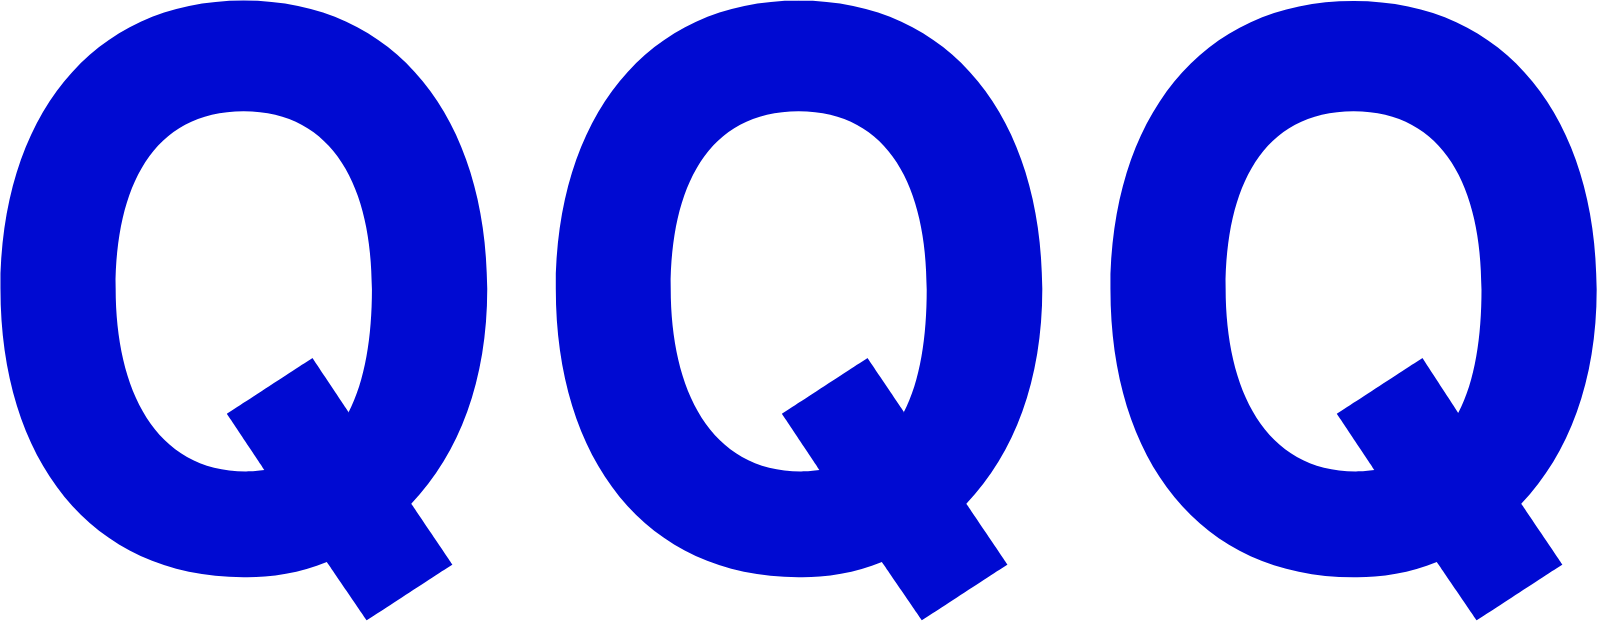 Invesco QQQ logo in transparent PNG and vectorized SVG formats